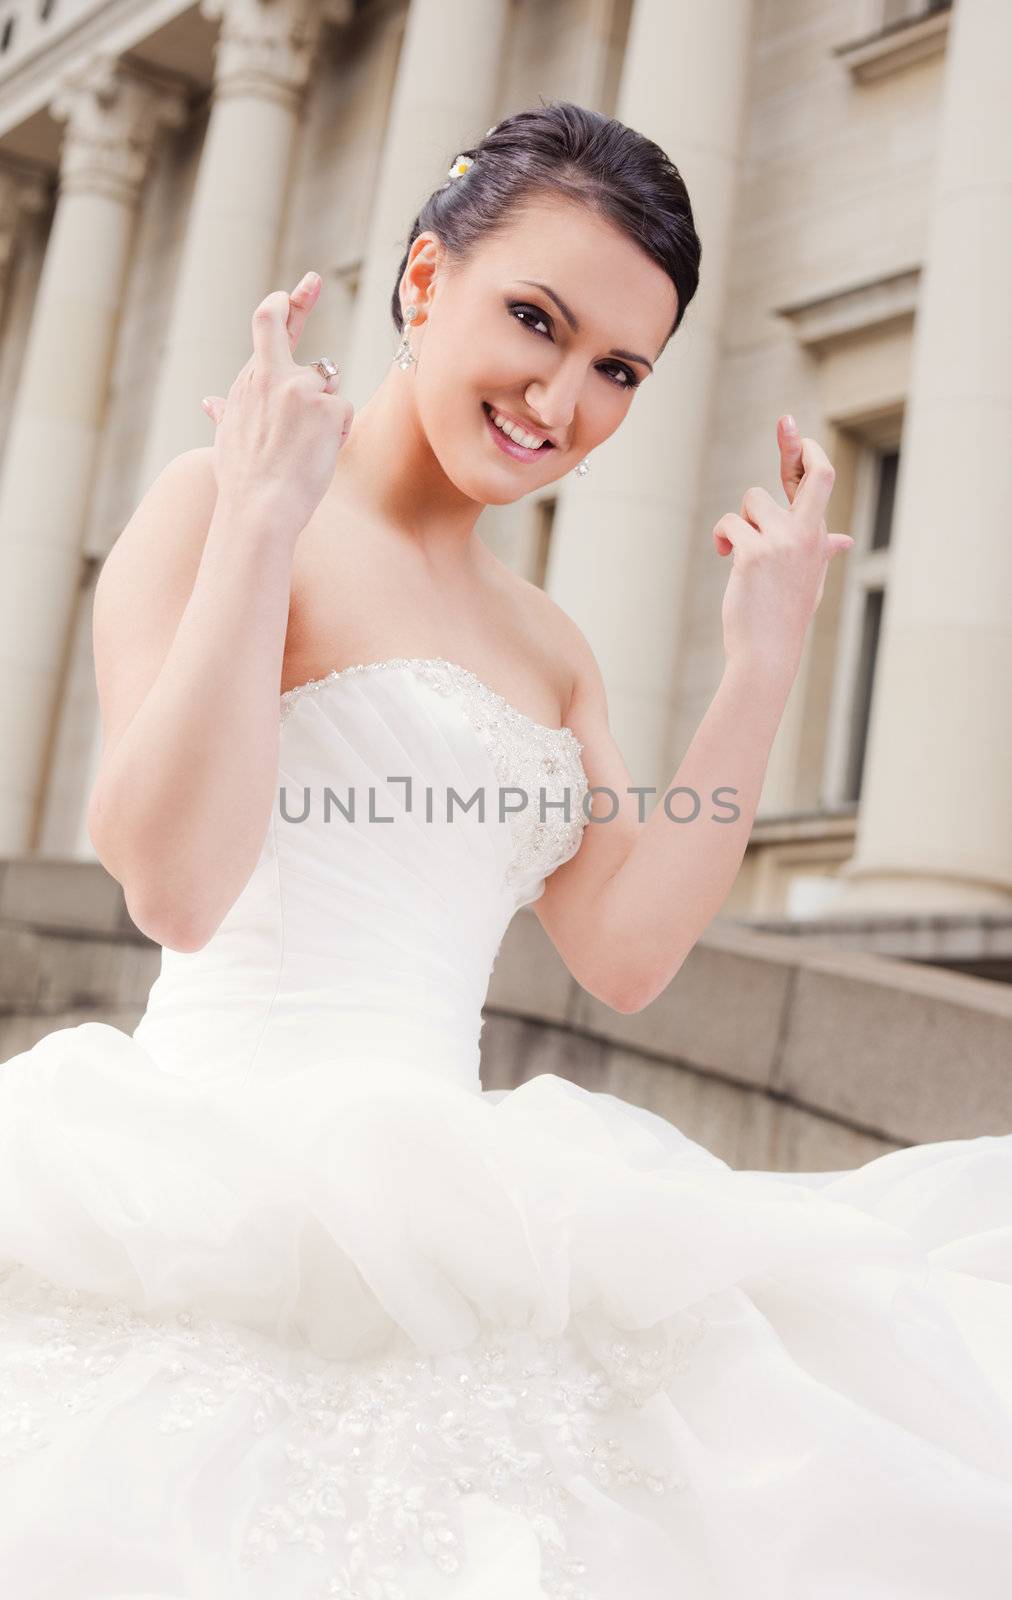 Happy bride with wedding dress showing fingers crossed